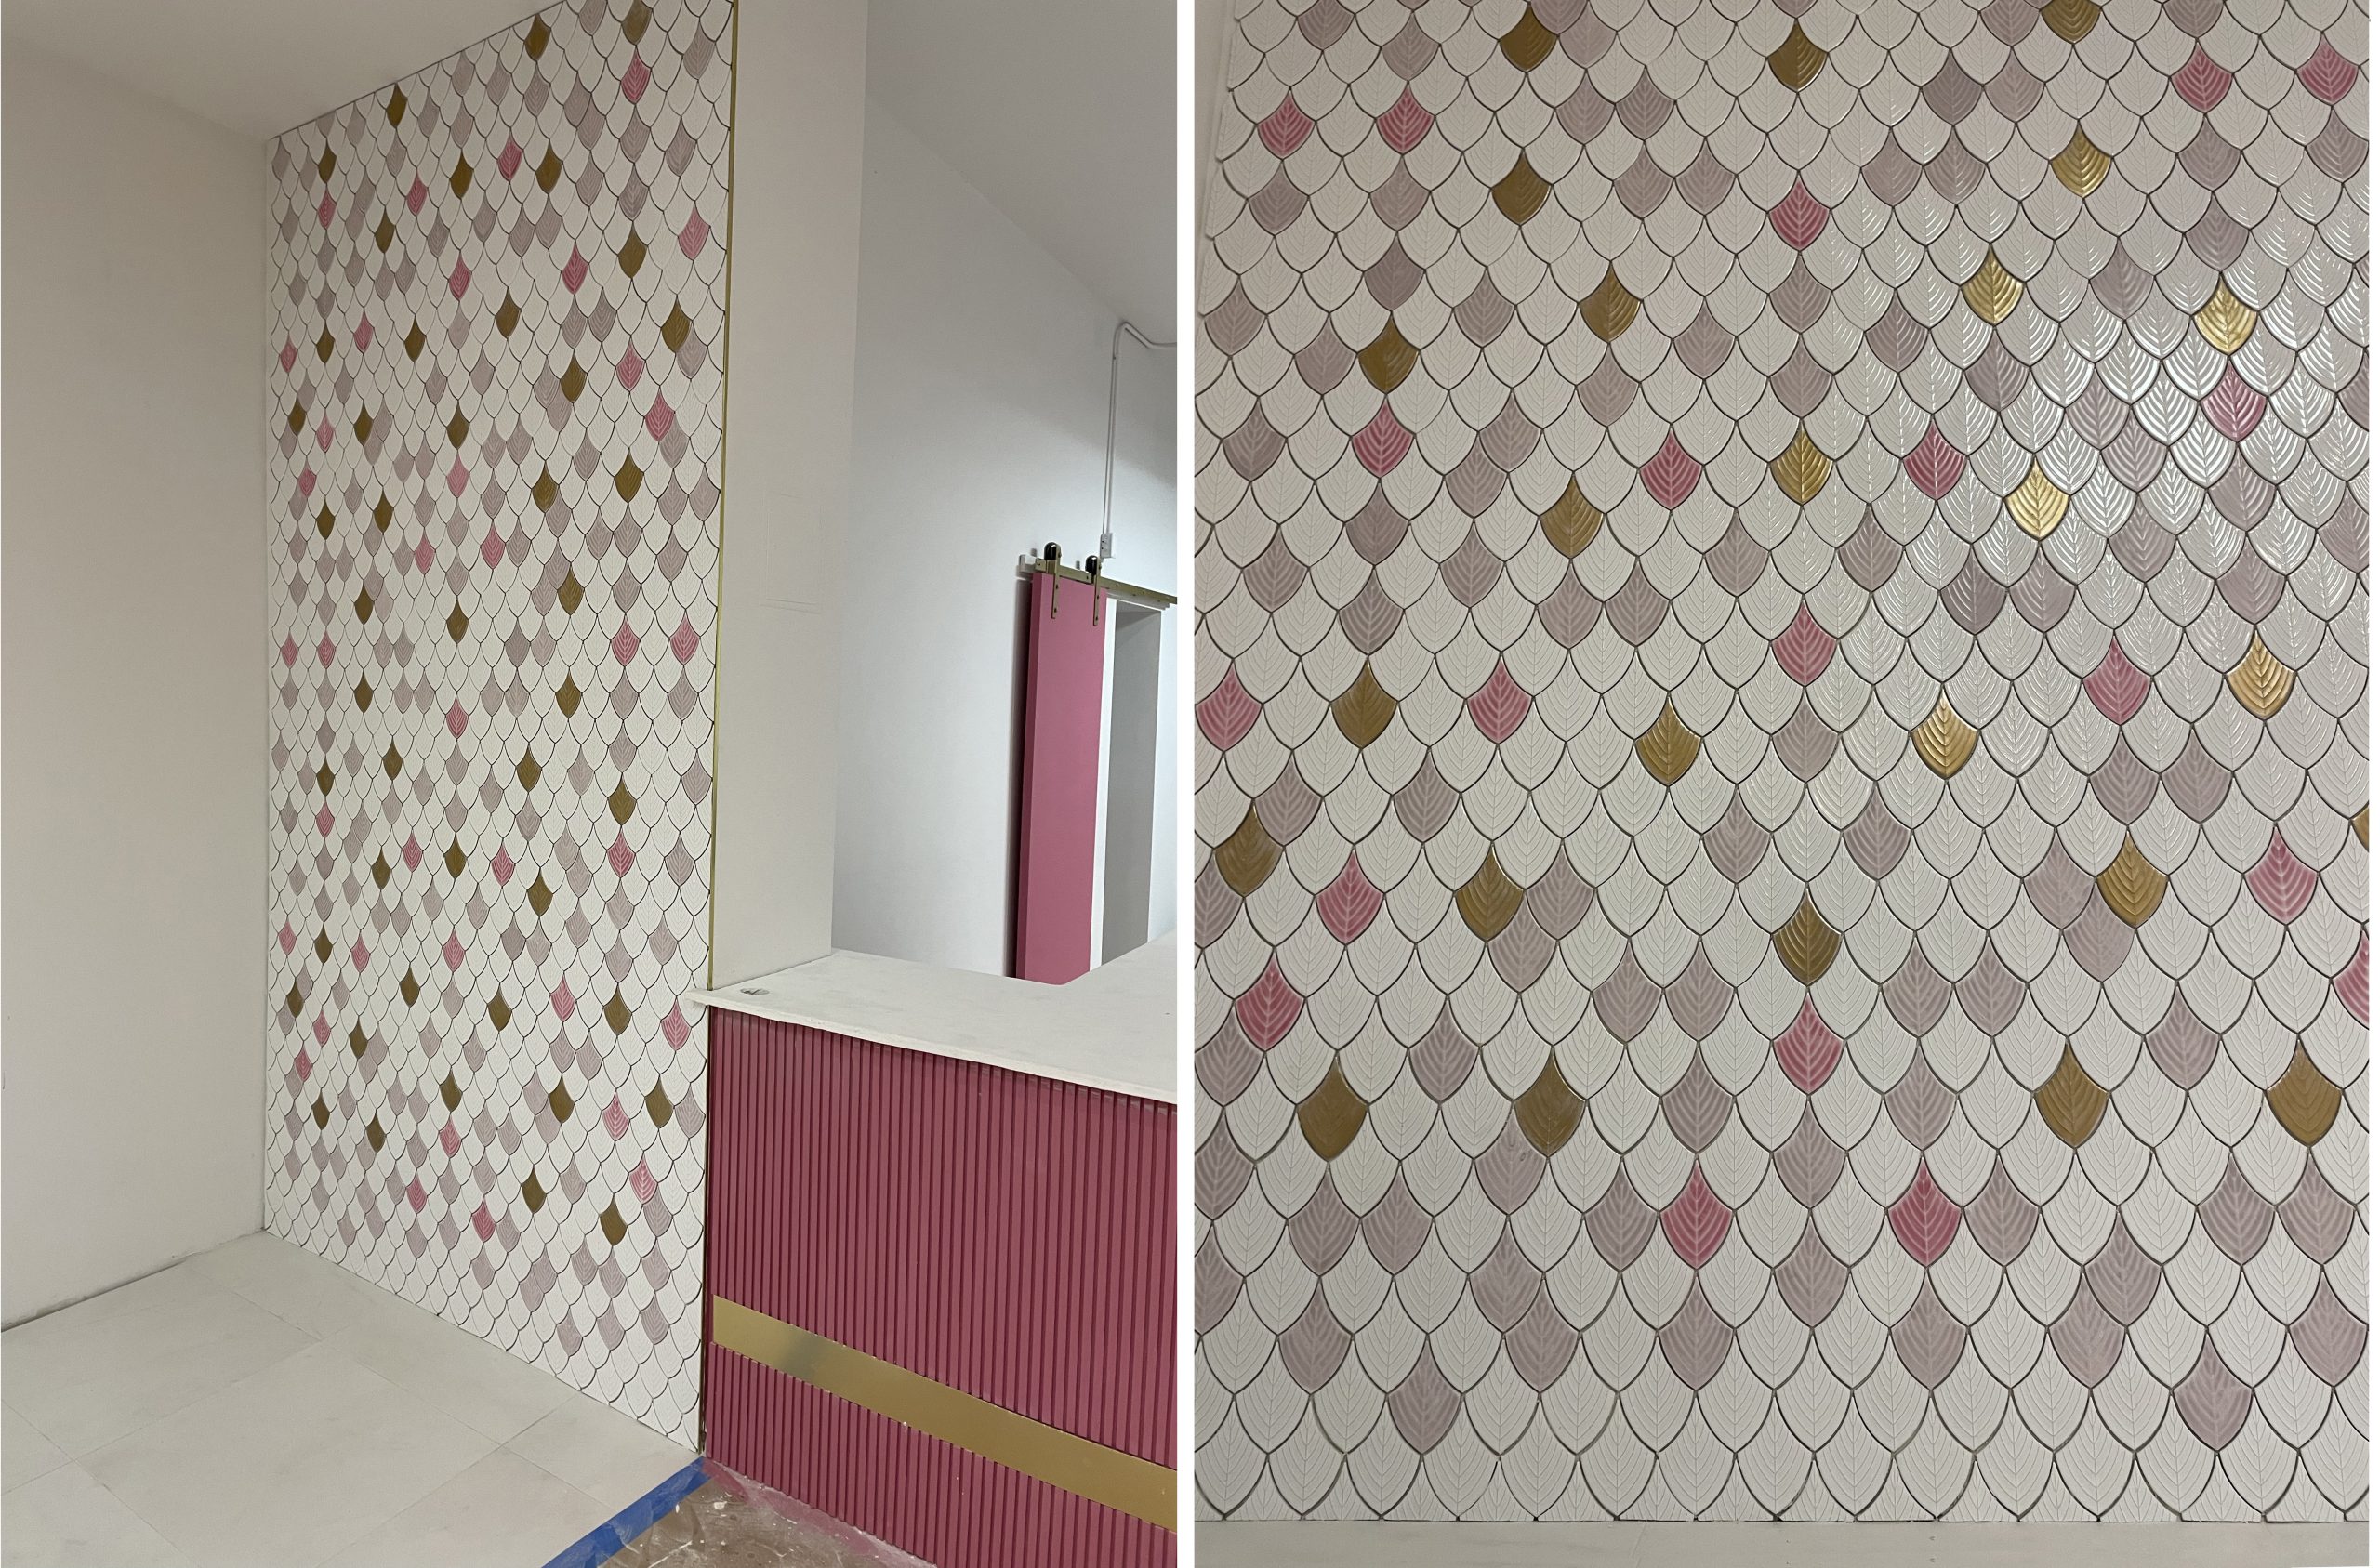 Custom mosaic feature wall -from design to installation